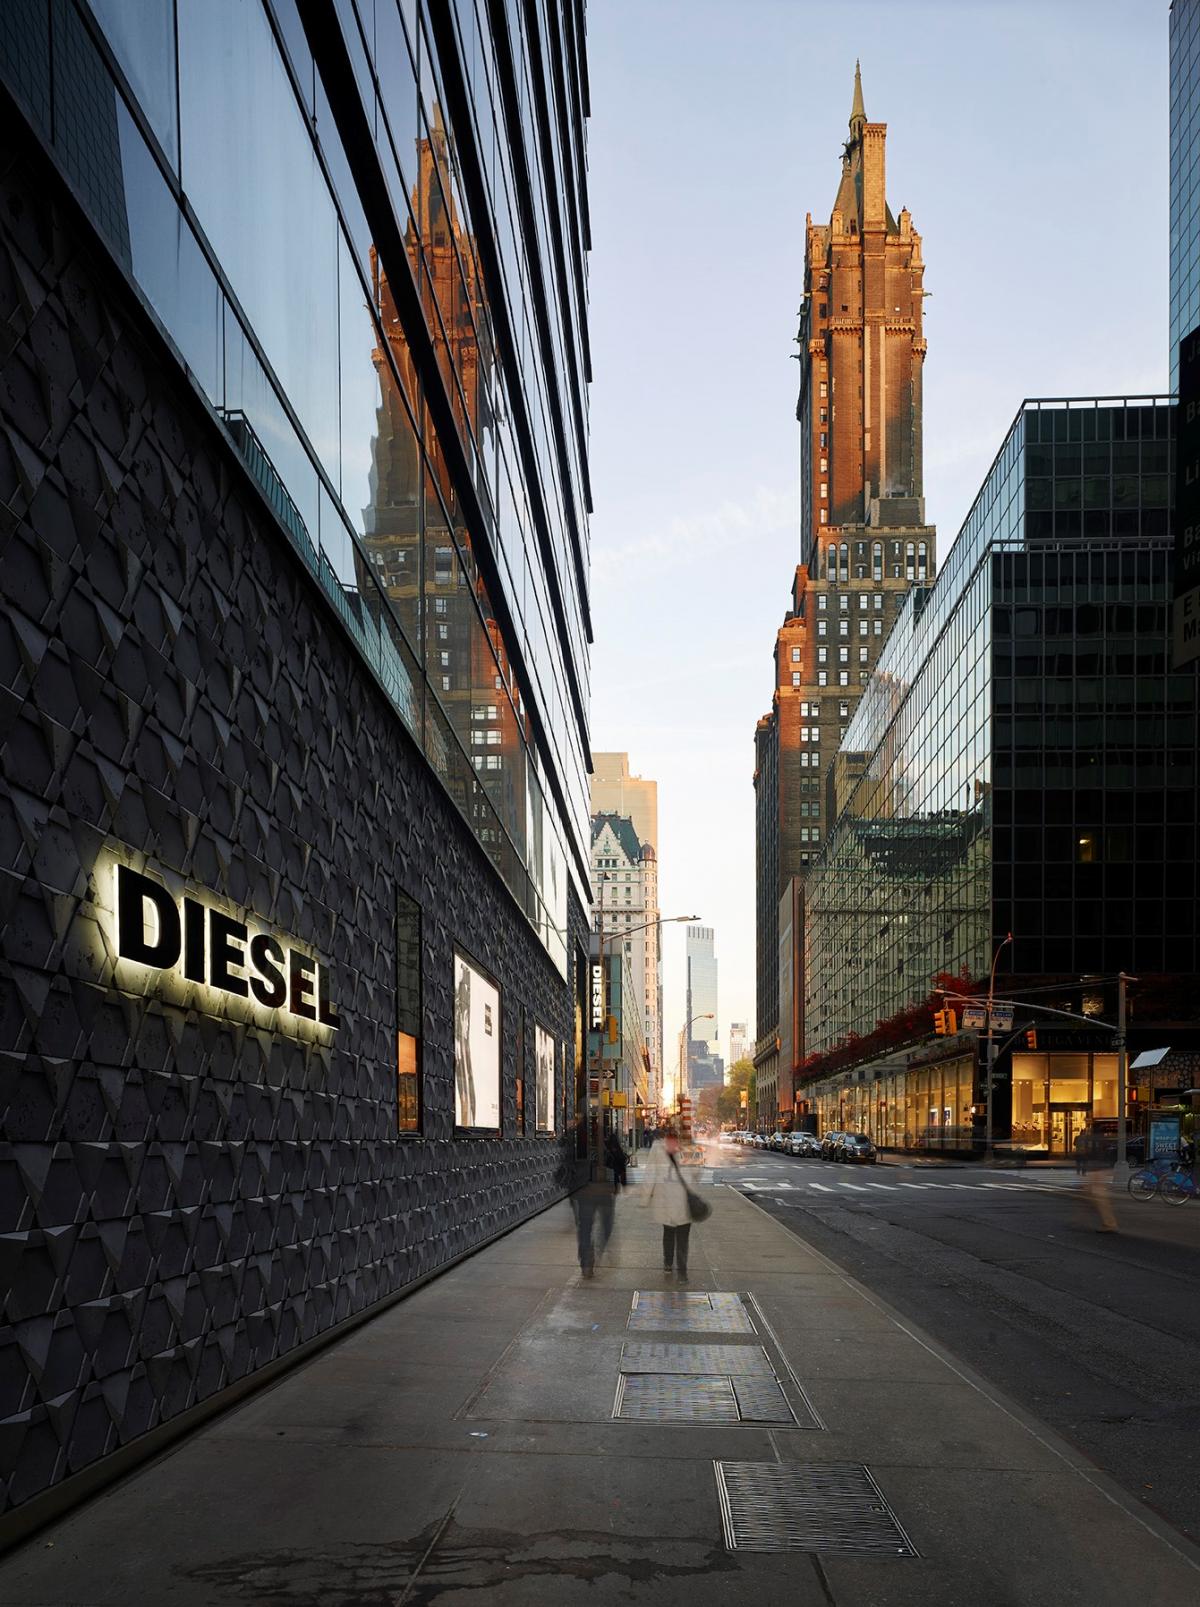 The new Diesel store on Madison Avenue in NYC